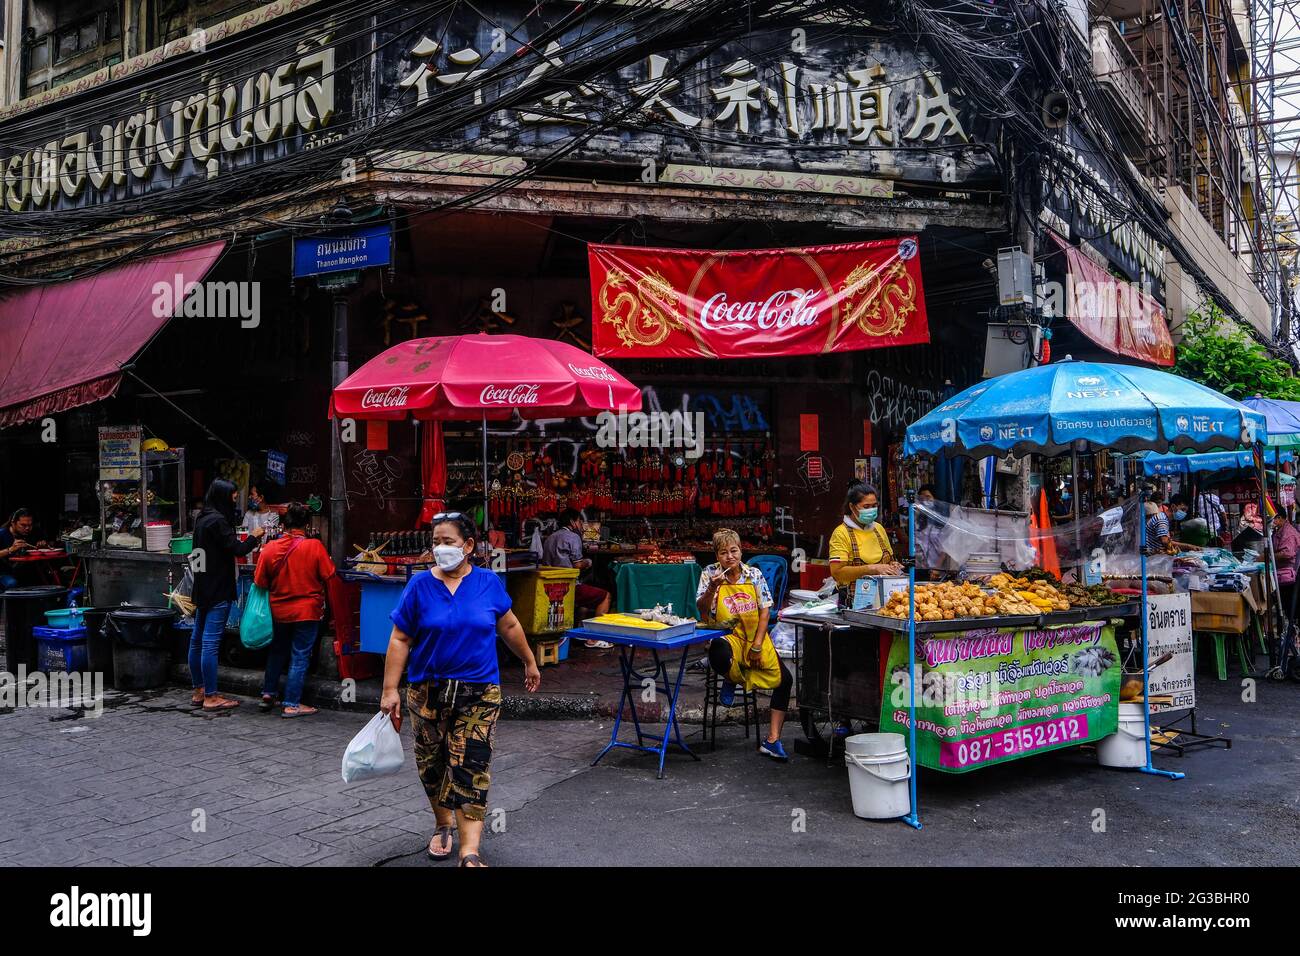 A busy street scene in Chinatown, Bangkok, Thailand. Stock Photo